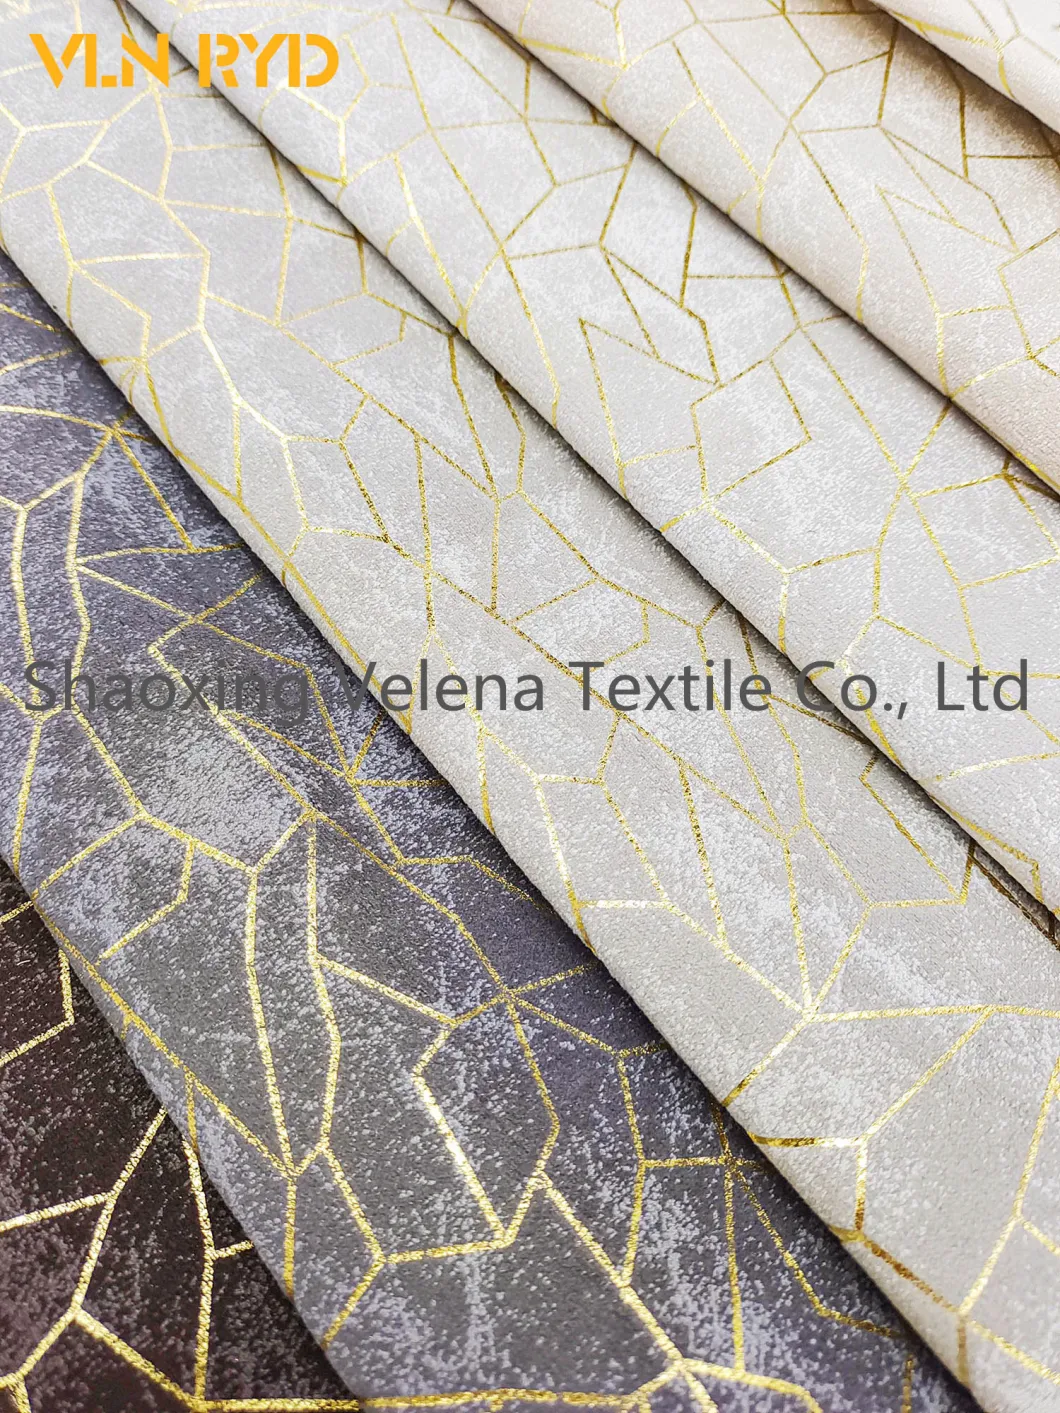 China Factory Holland Velvet Dyeing with Glue Emboss and Foil Bronzing Upholstery Furniture Dubai Morocco Turkey Textile Fabric 0409-2